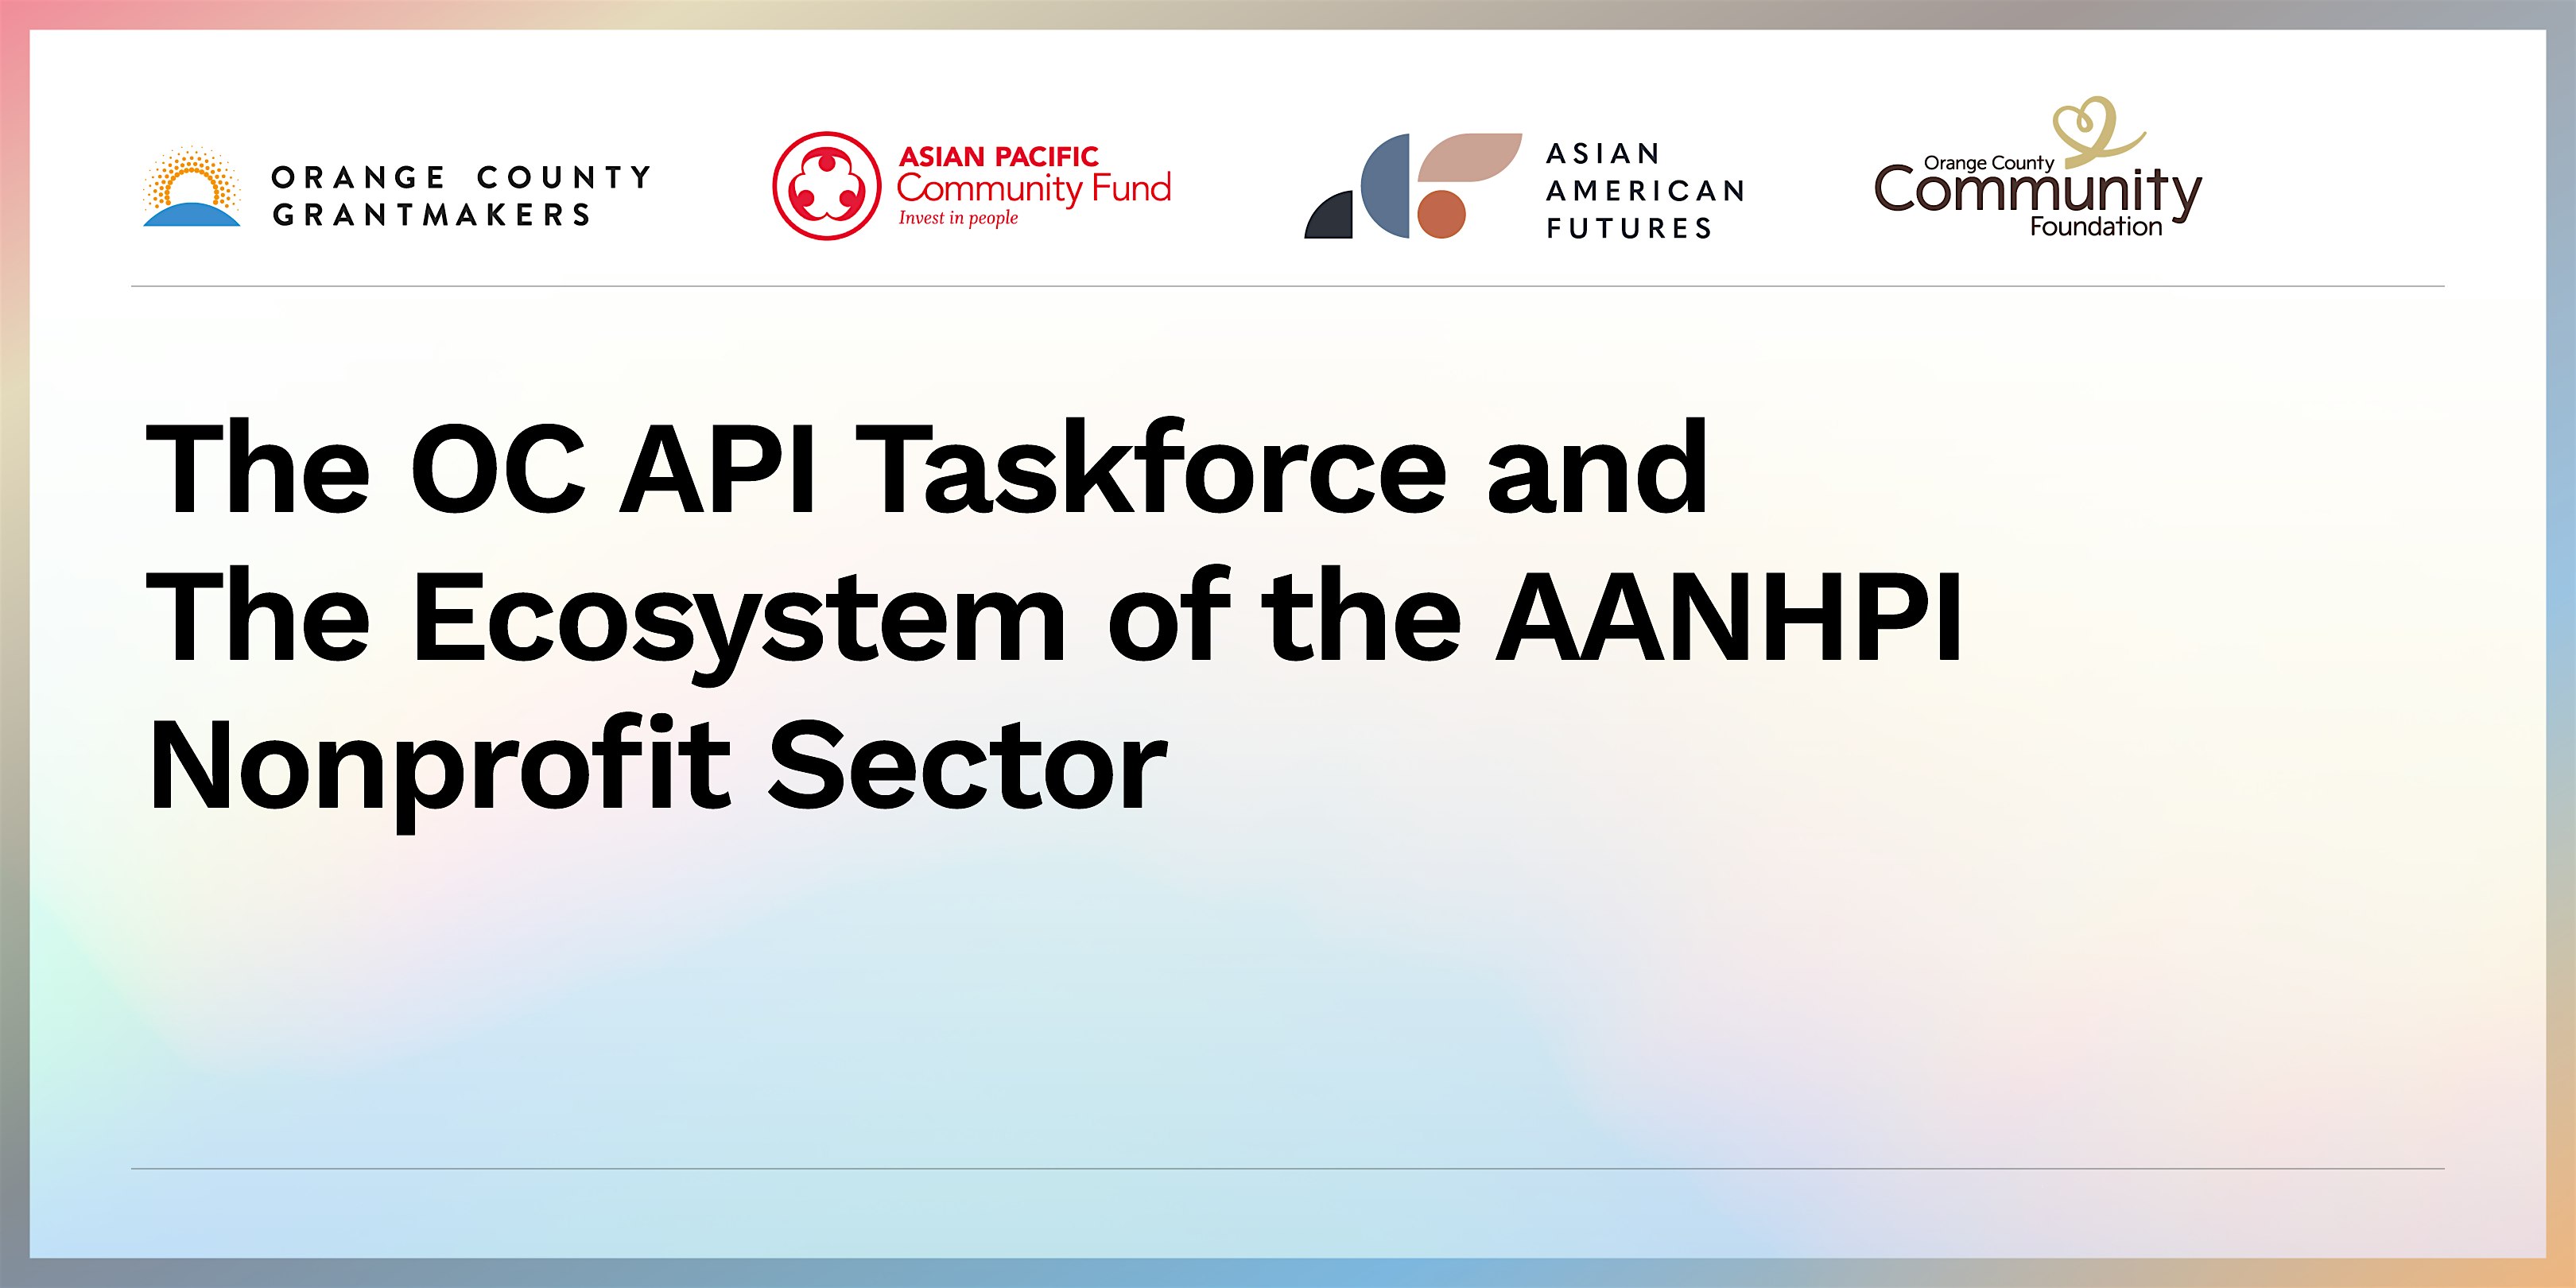 The OC API Taskforce and the Ecosystem of the AANHPI Nonprofit Sector